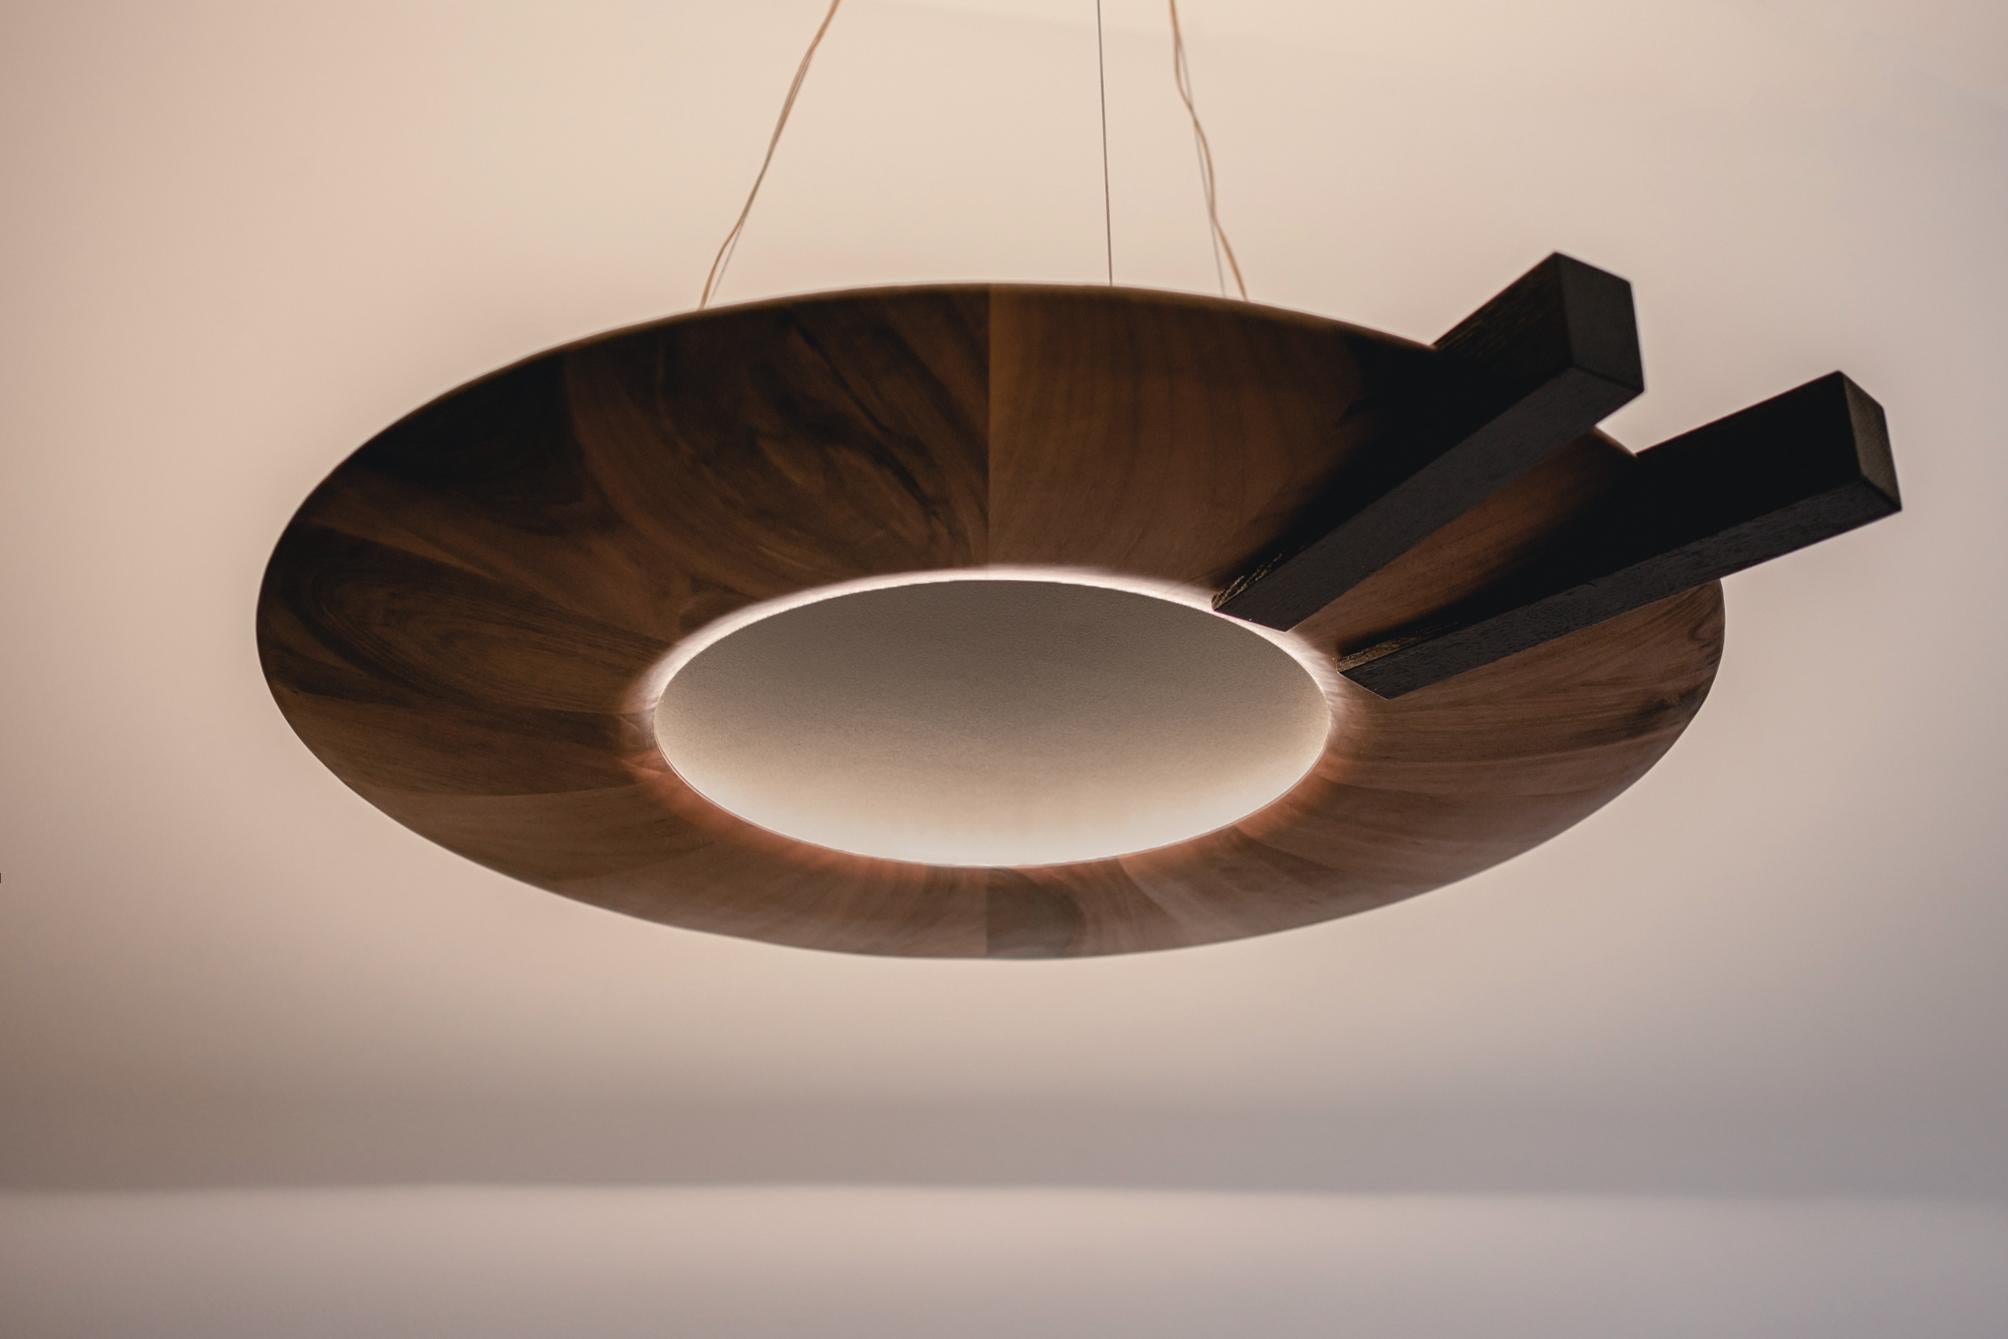 Magnificent design
Oko pendant lamp
This magnificent pendant lamp was inspired by the shape of a human eye. The name 